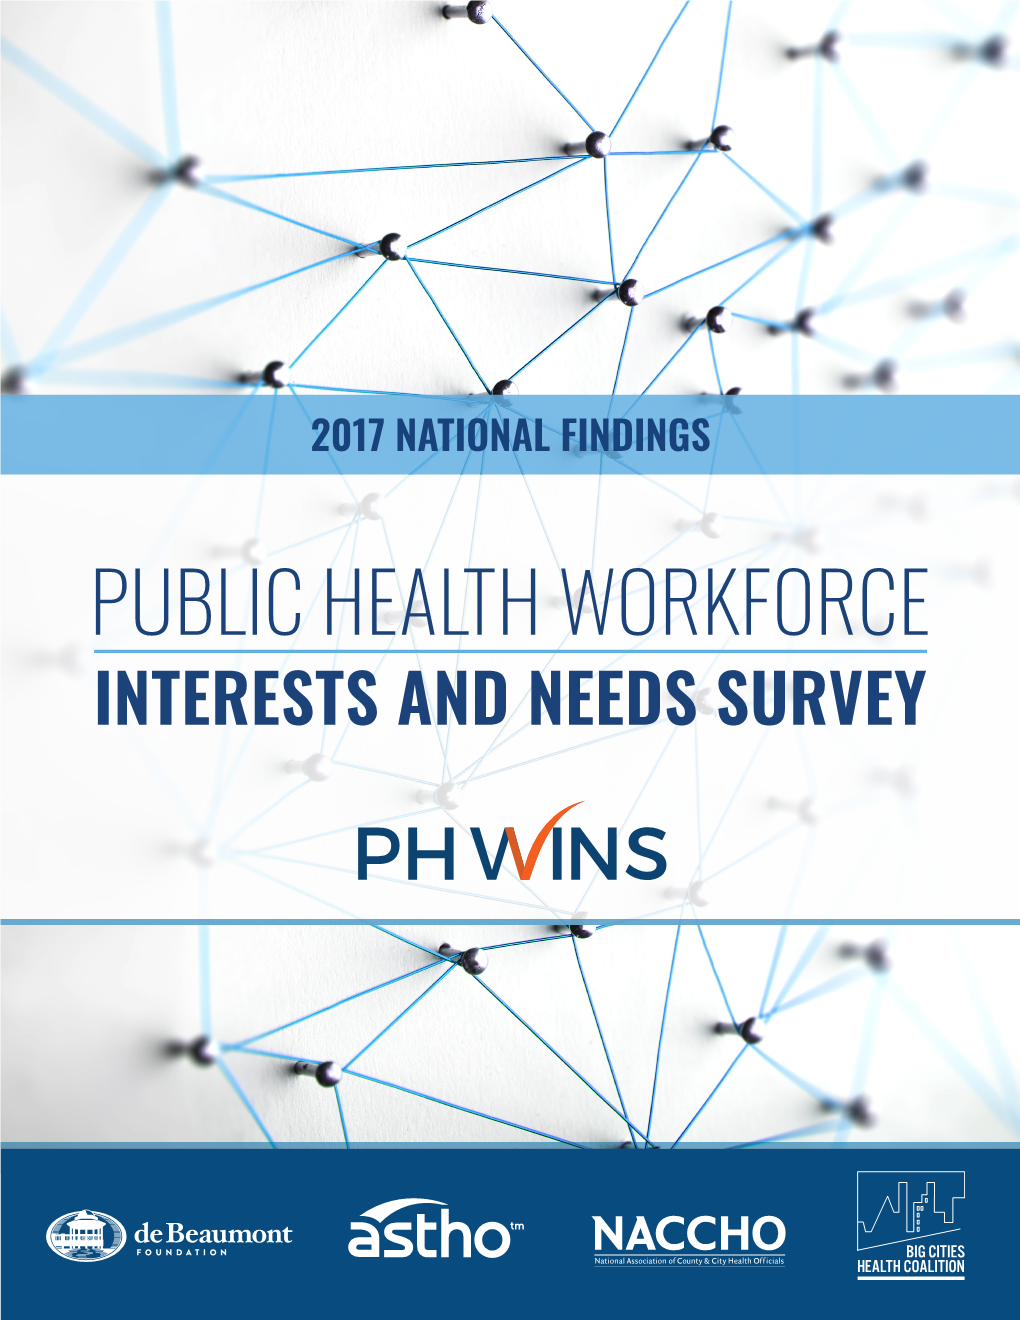 Public Health Workforce Interests and Needs Survey